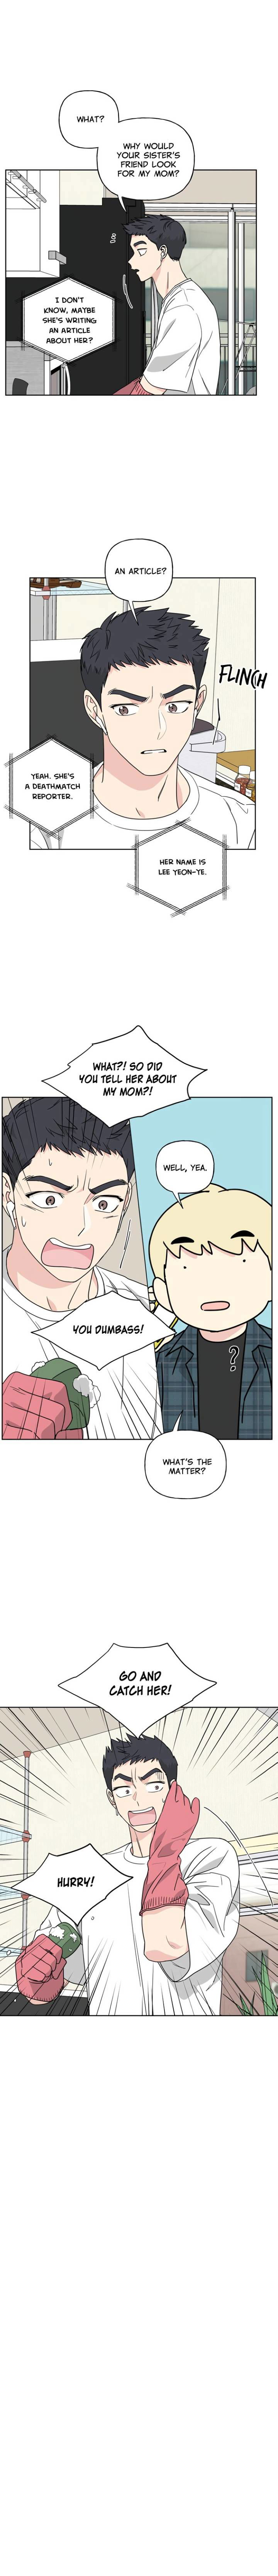 mother-im-sorry-chap-31-4